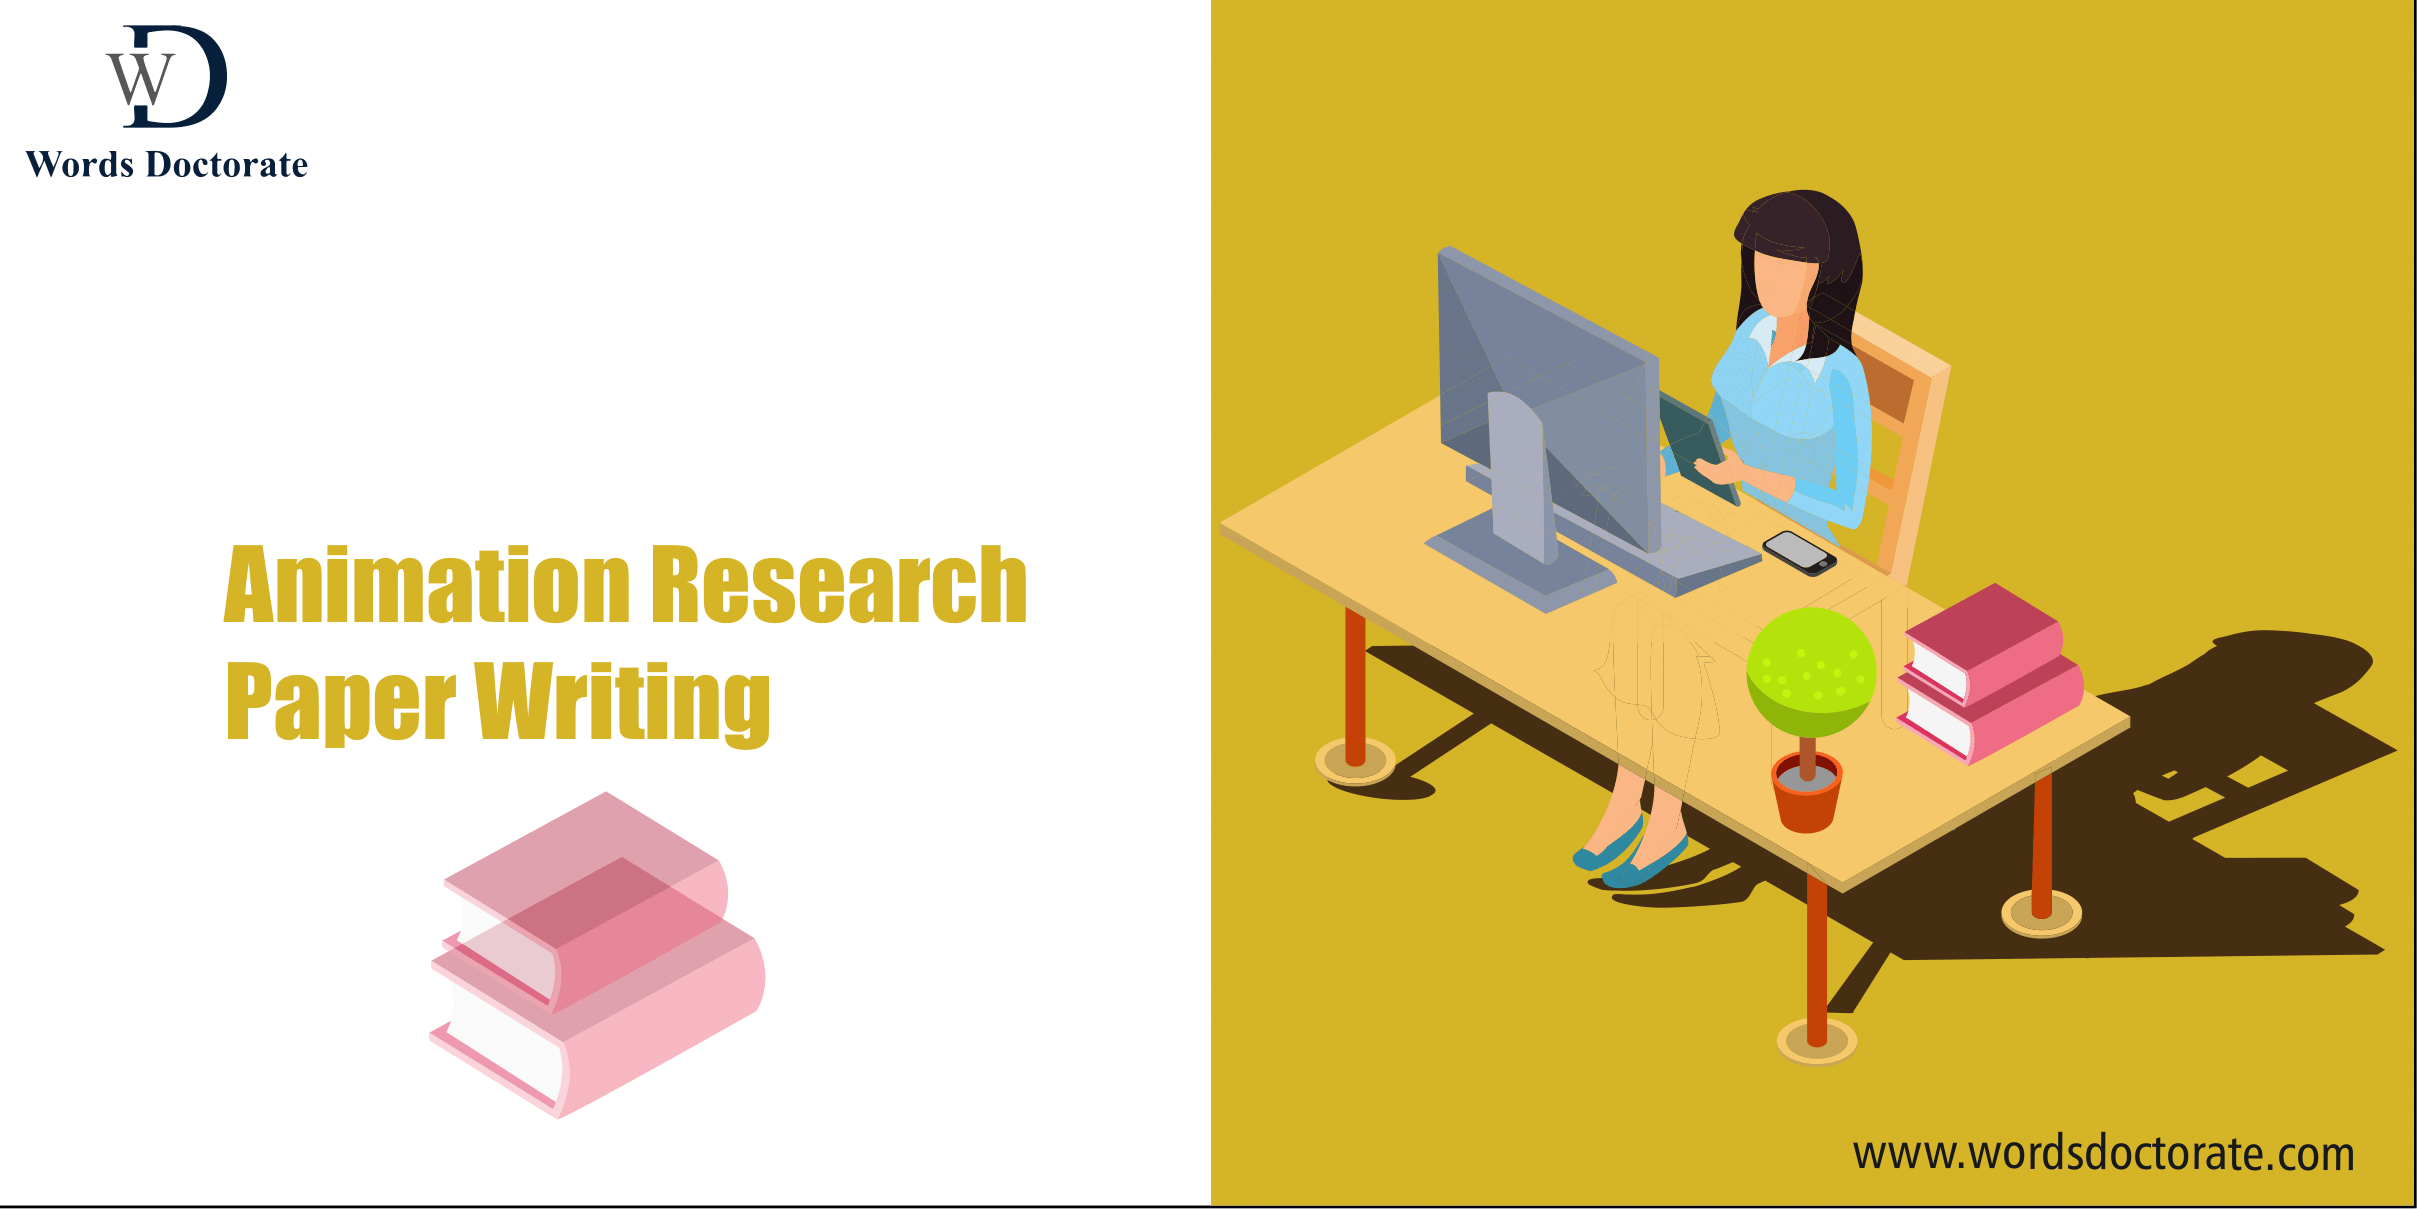 Animation Research Paper Writing